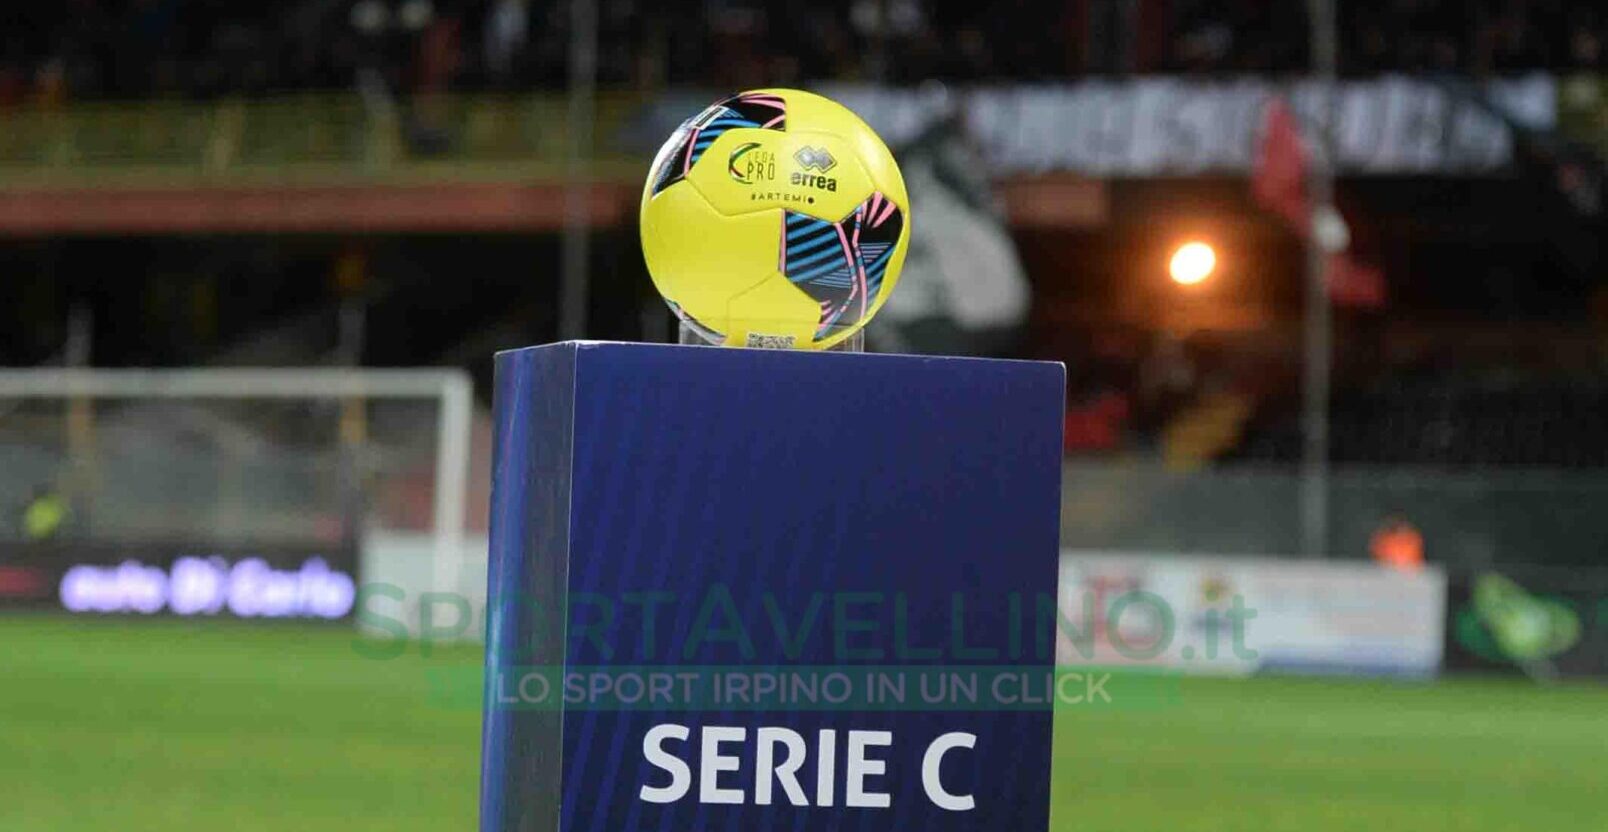 play off serie c